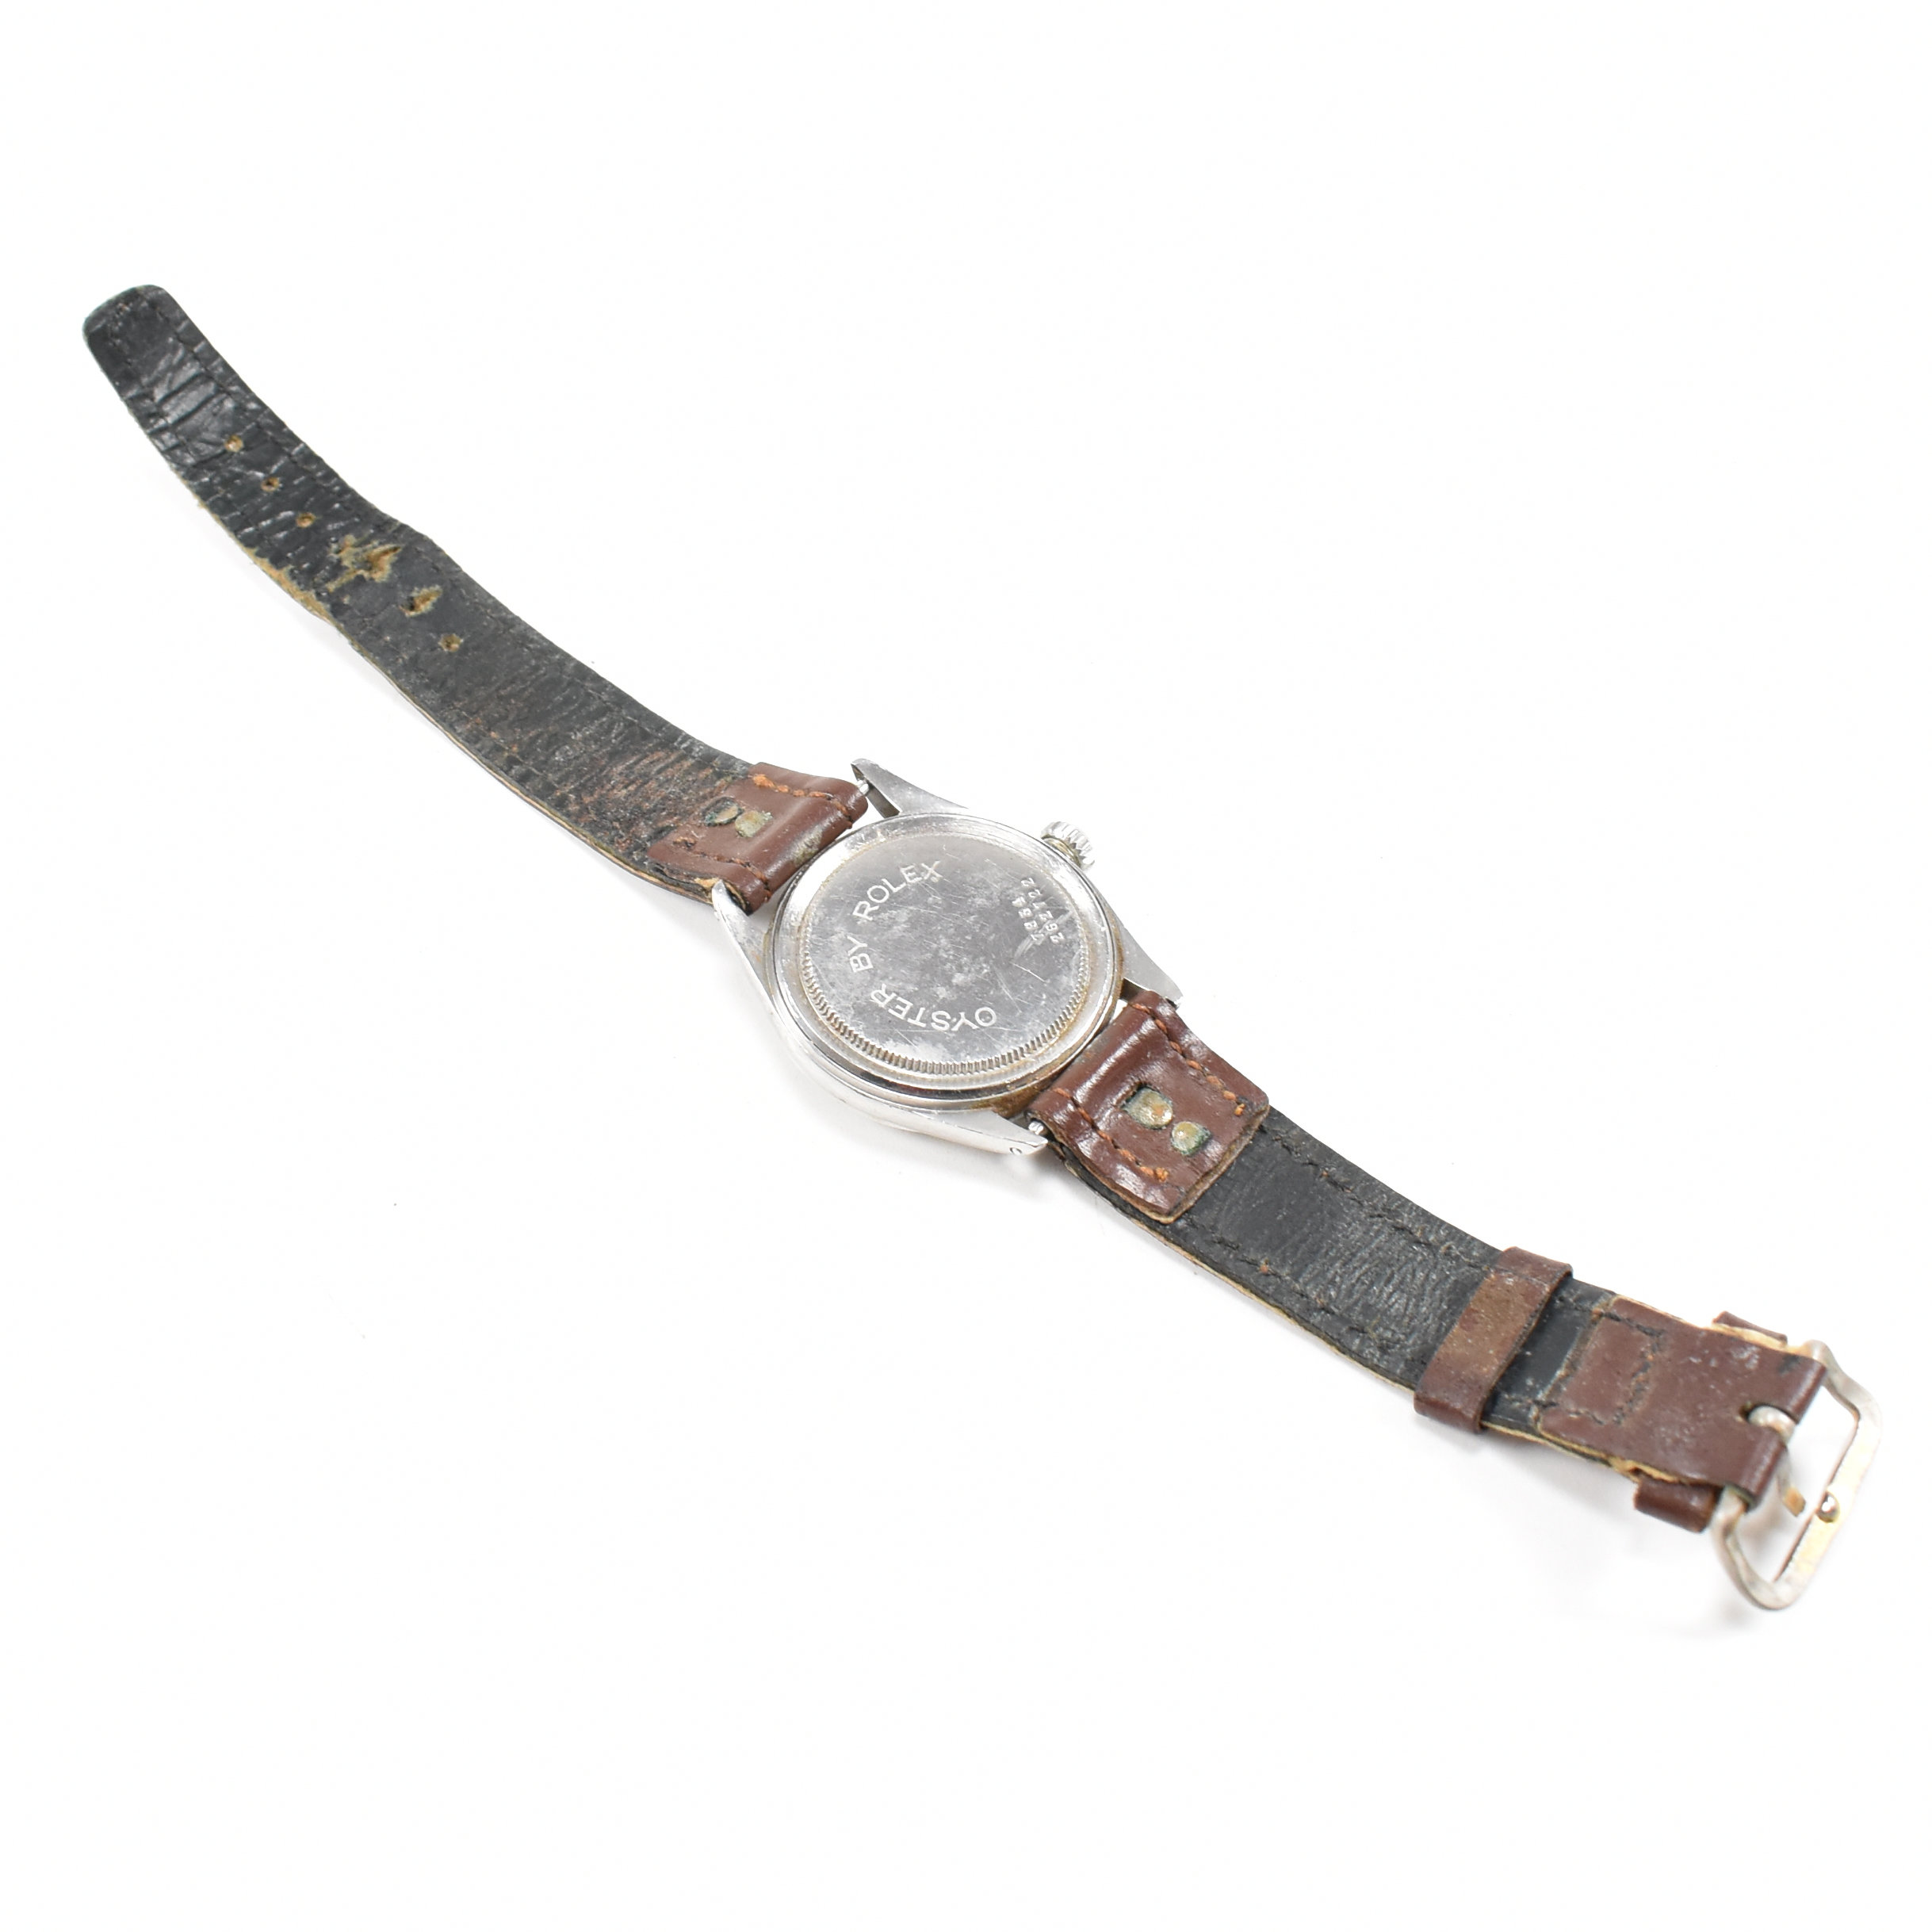 MID CENTURY TUDOR OYSTER STAINLESS STEEL WRISTWATCH - Image 6 of 7